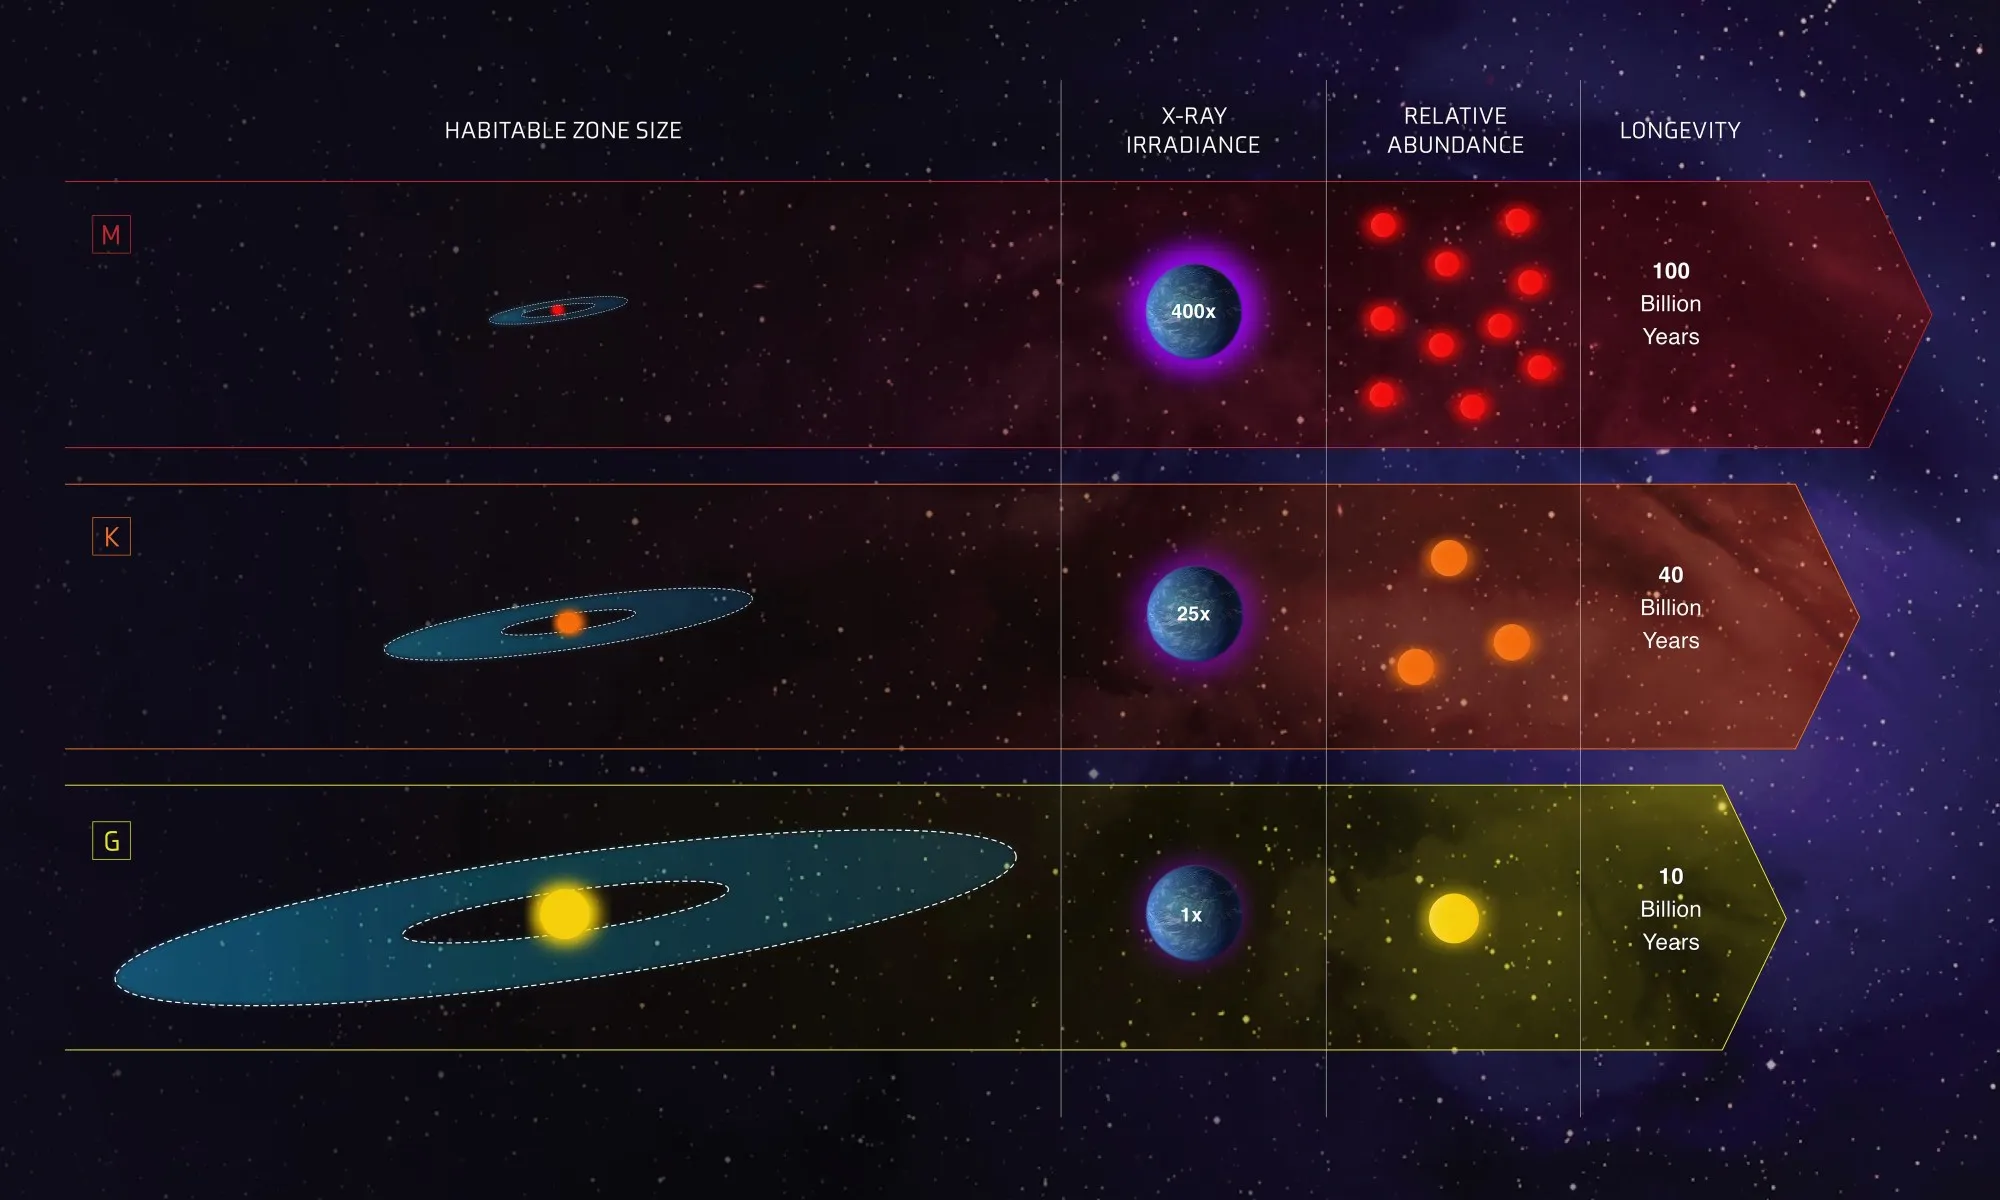 This picture shows three types of stars in our galaxy: G stars, which are like our Sun; K dwarfs, which are smaller and cooler; and M dwarfs, which are even fainter and cooler. It compares them in terms of important things. Hotter stars have wider habitable zones where life might exist. Red dwarf M stars can last more than 100 billion years, K dwarfs can be 15 to 45 billion years old, and our Sun only lasts for 10 billion years. Red dwarfs can emit a lot more harmful radiation than our Sun, but K dwarfs emit less. Red dwarfs make up 73% of the Milky Way's stars, Sunlike stars are only 6%, and K dwarfs are 13%. When you balance these things, K dwarfs seem to be the best stars for possibly having advanced life forms.